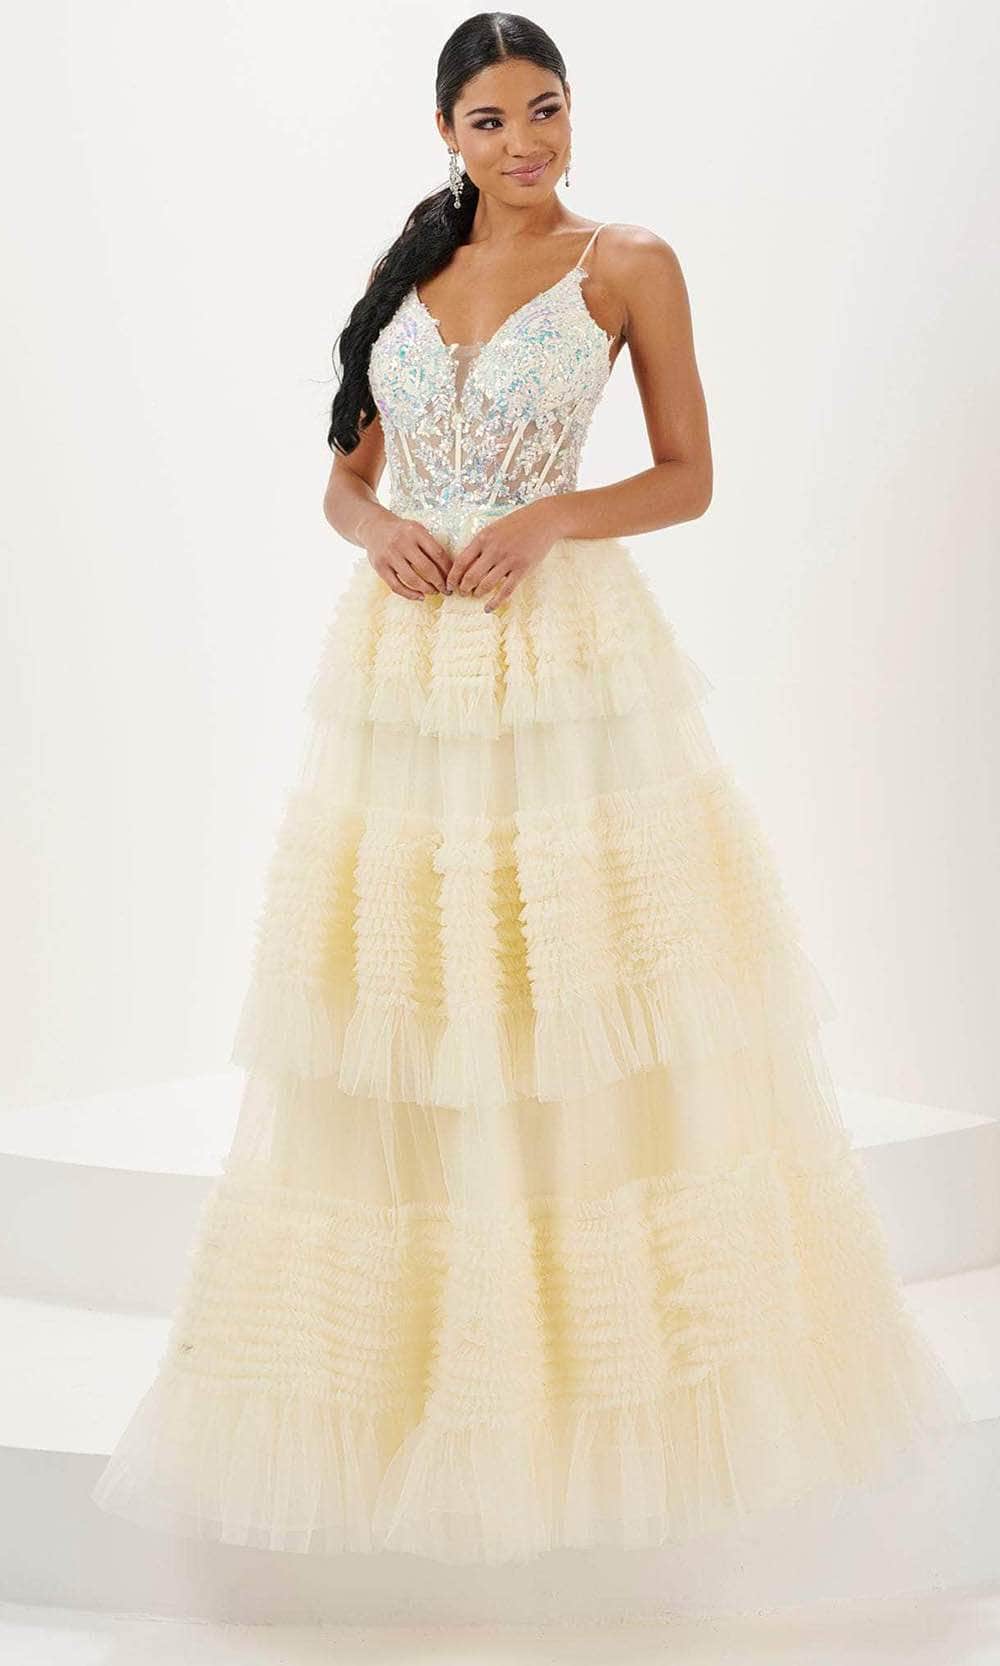 Image of Tiffany Designs 16054 - Ruffled Tulle Prom Dress